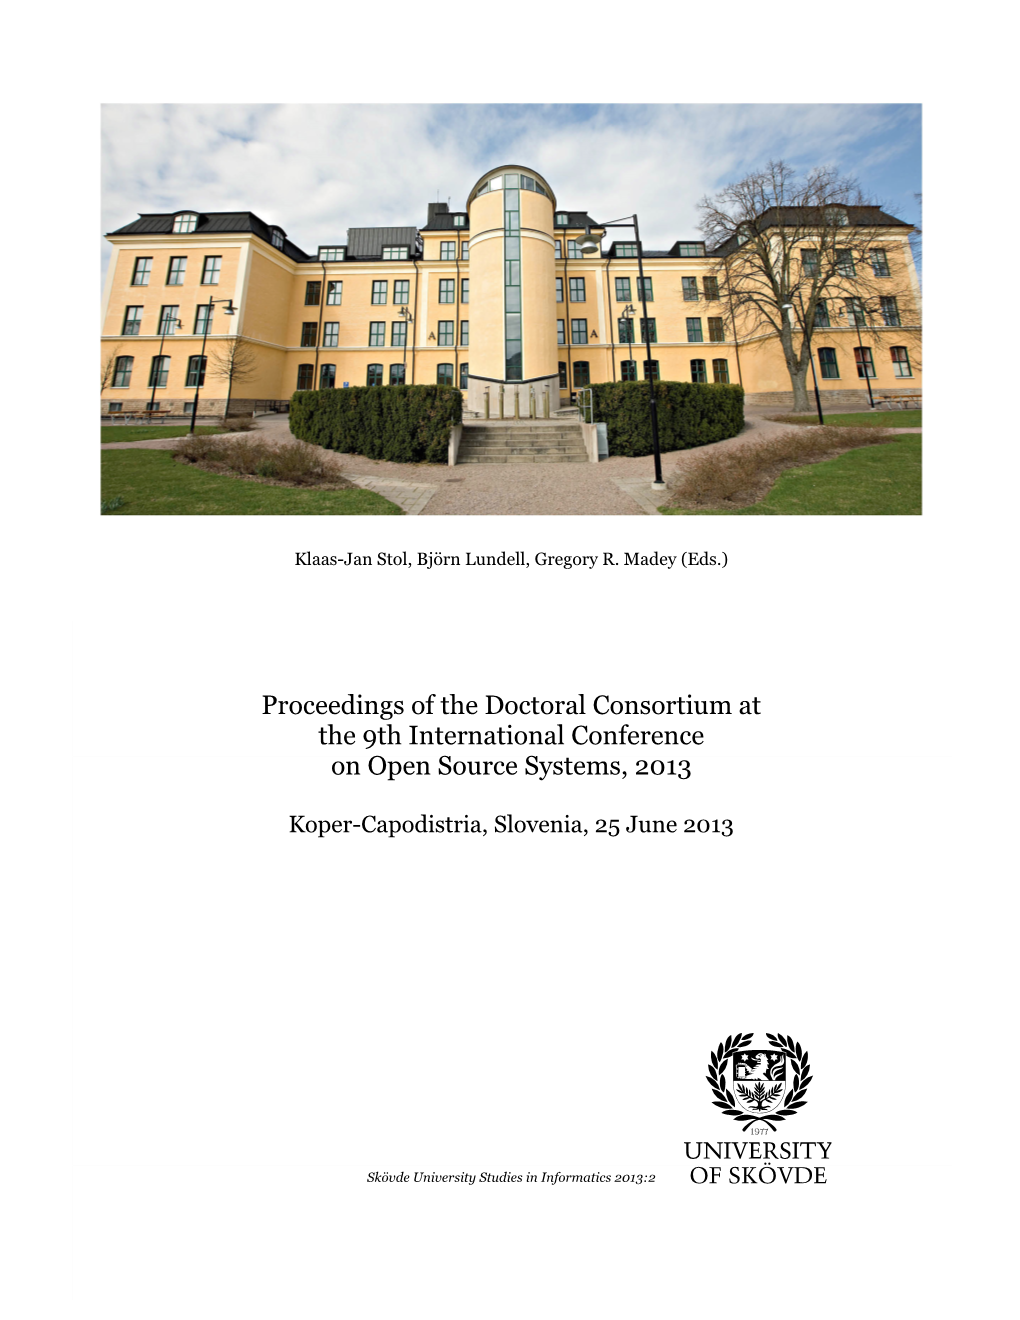 Proceedings of the Doctoral Consortium at the 9Th International Conference on Open Source Systems, 2013